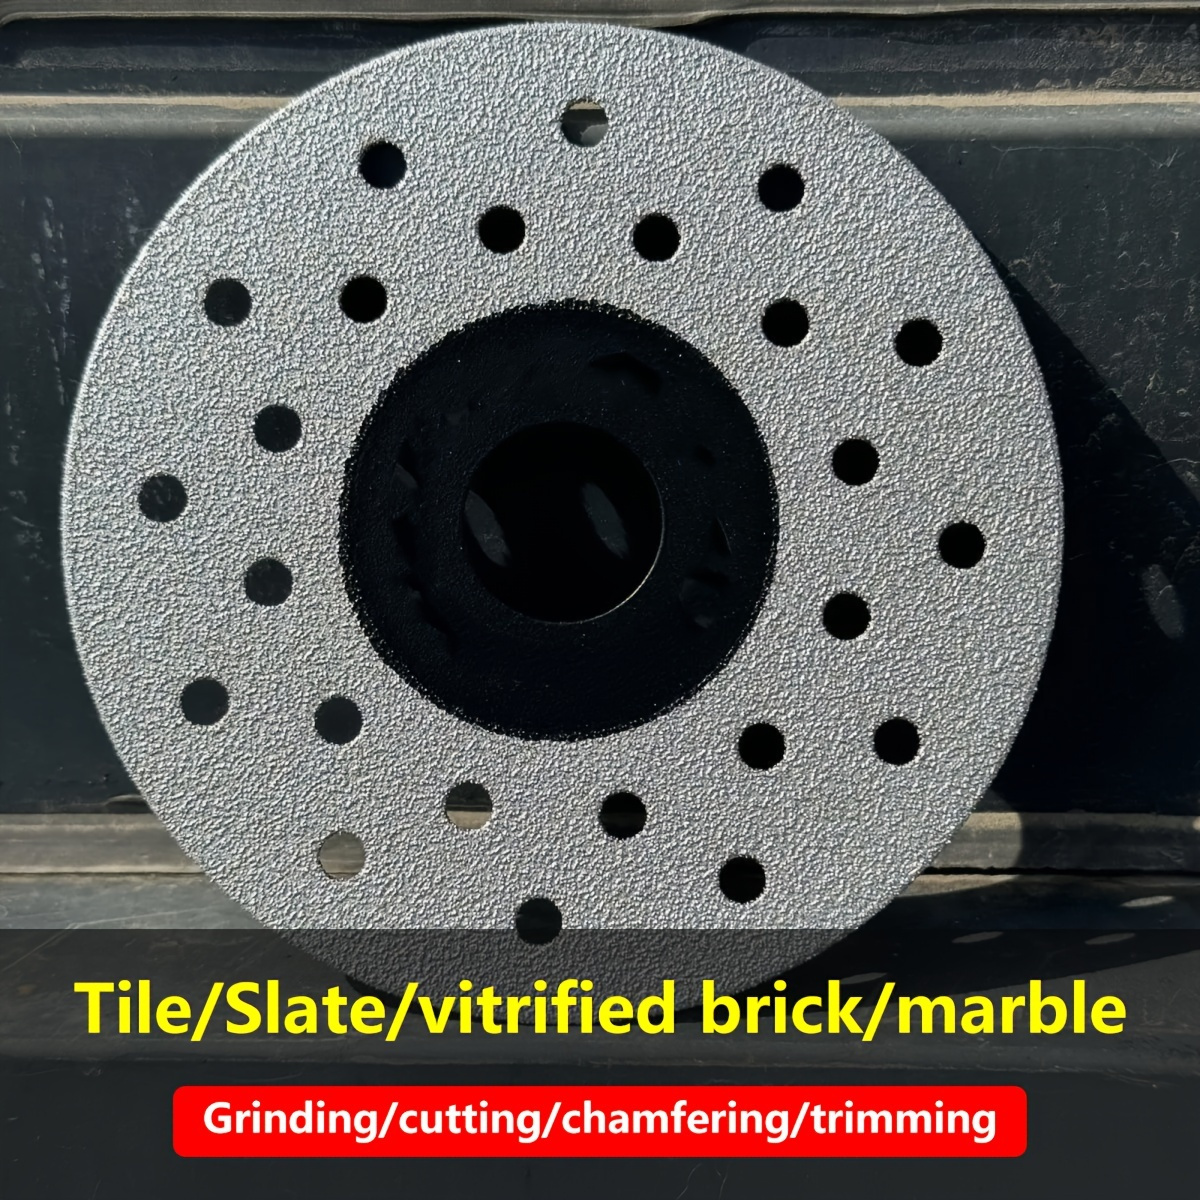 

Ultra-thin Ceramic Cutting & Grinding Disc Set For Tile, Marble, Glass - Dual-purpose Saw Blades For Precision Trimming And Chamfering